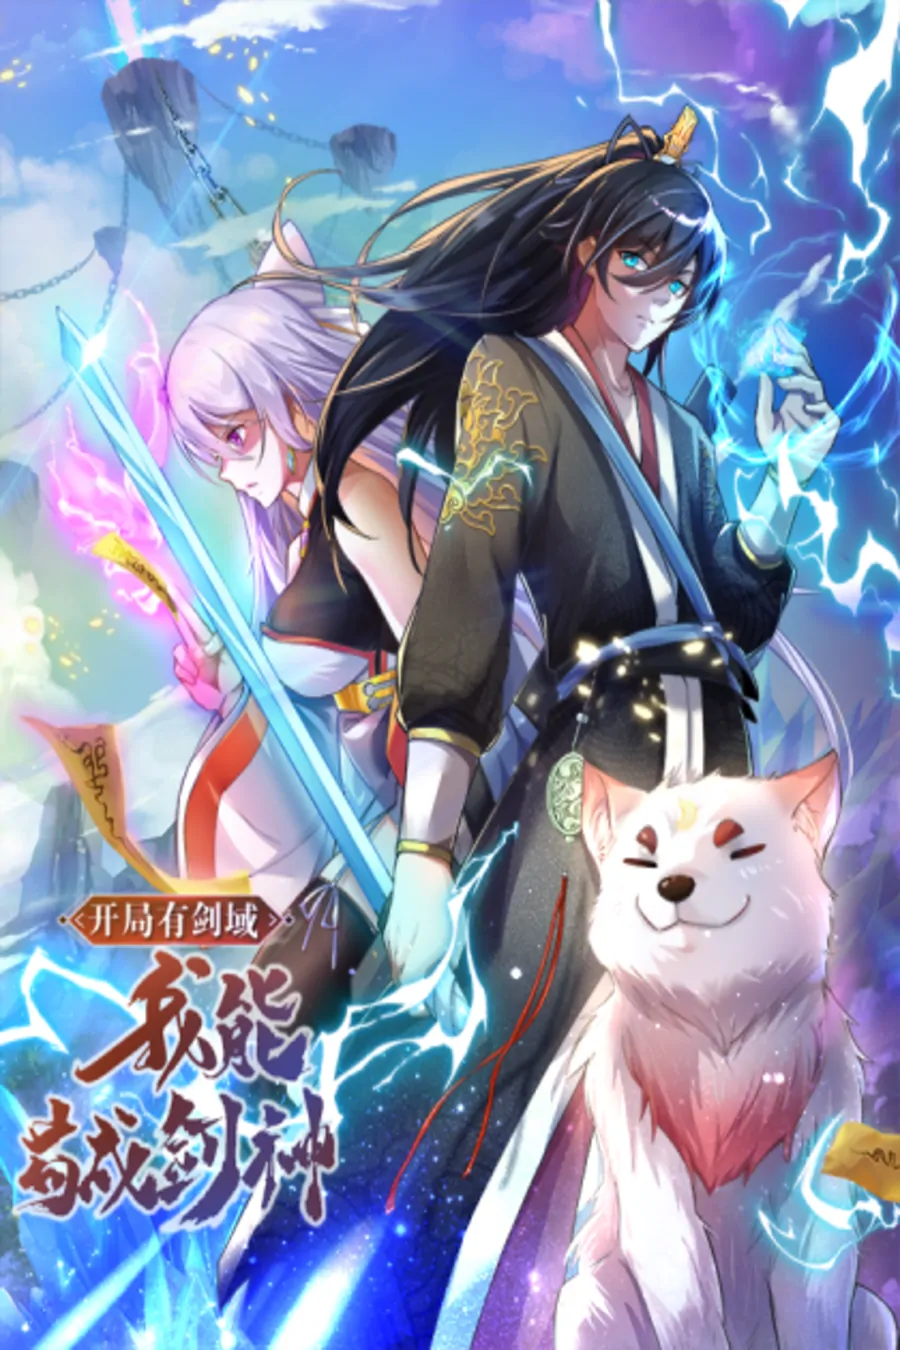 Becoming A Sword Deity By Expanding My Sword Domain - chapter 104 - #1